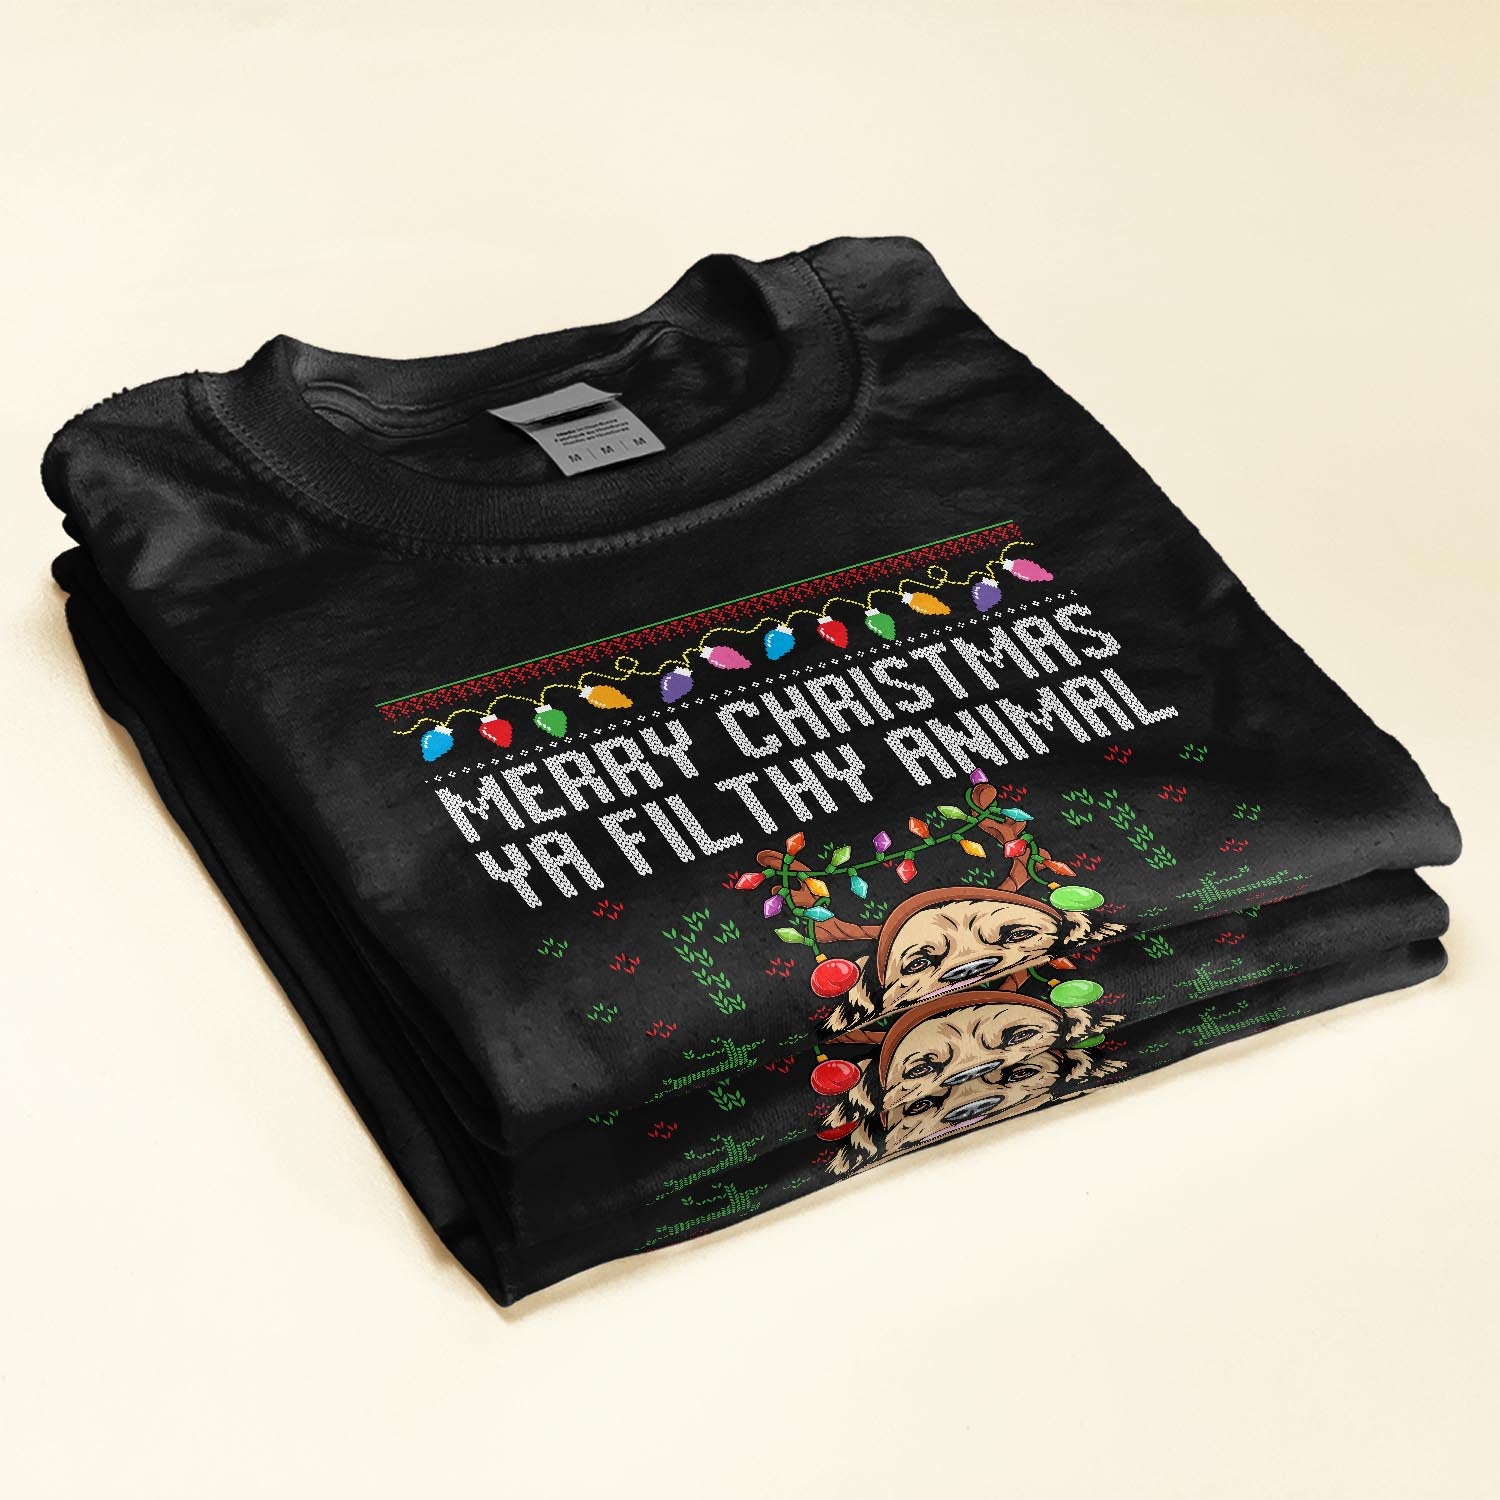 Merry Christmas Ya Filthy Animal - Personalized Shirt - Christmas, Birthday Gift For Pet Lover, Dog Lover, Cat Lover, Pet Owner, Dog Mom, Cat Mom, Dog Dad, Cat Dad